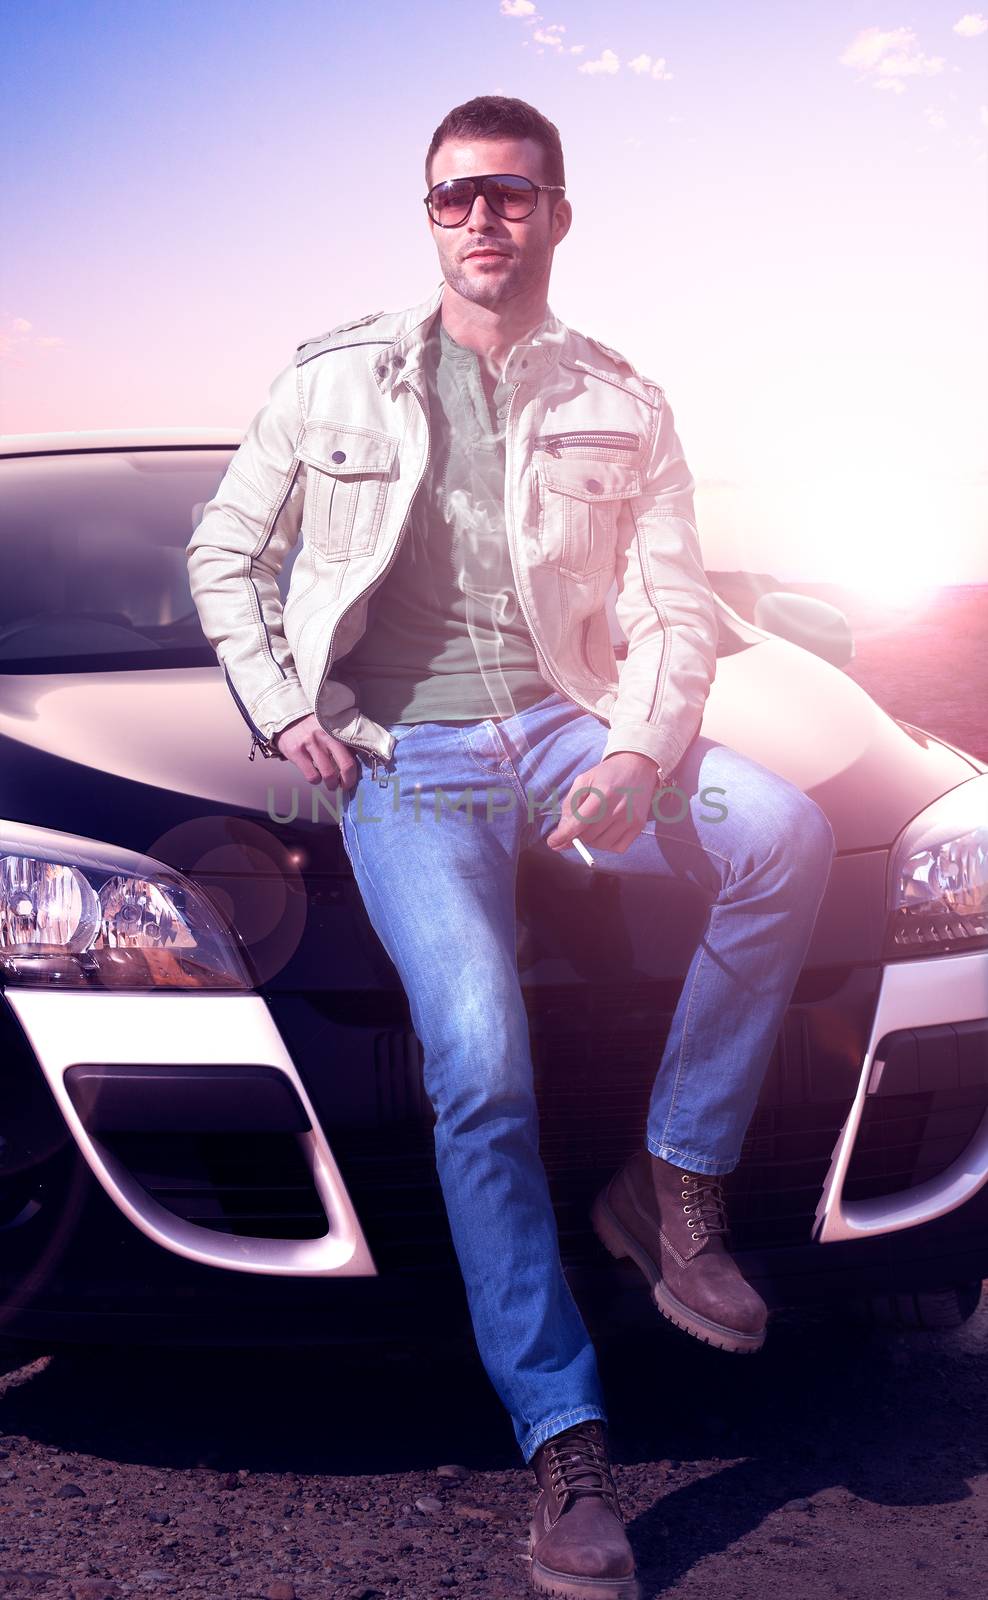 Young man portrait and car.Sunset landscape. Fashion and motor lifestyle.